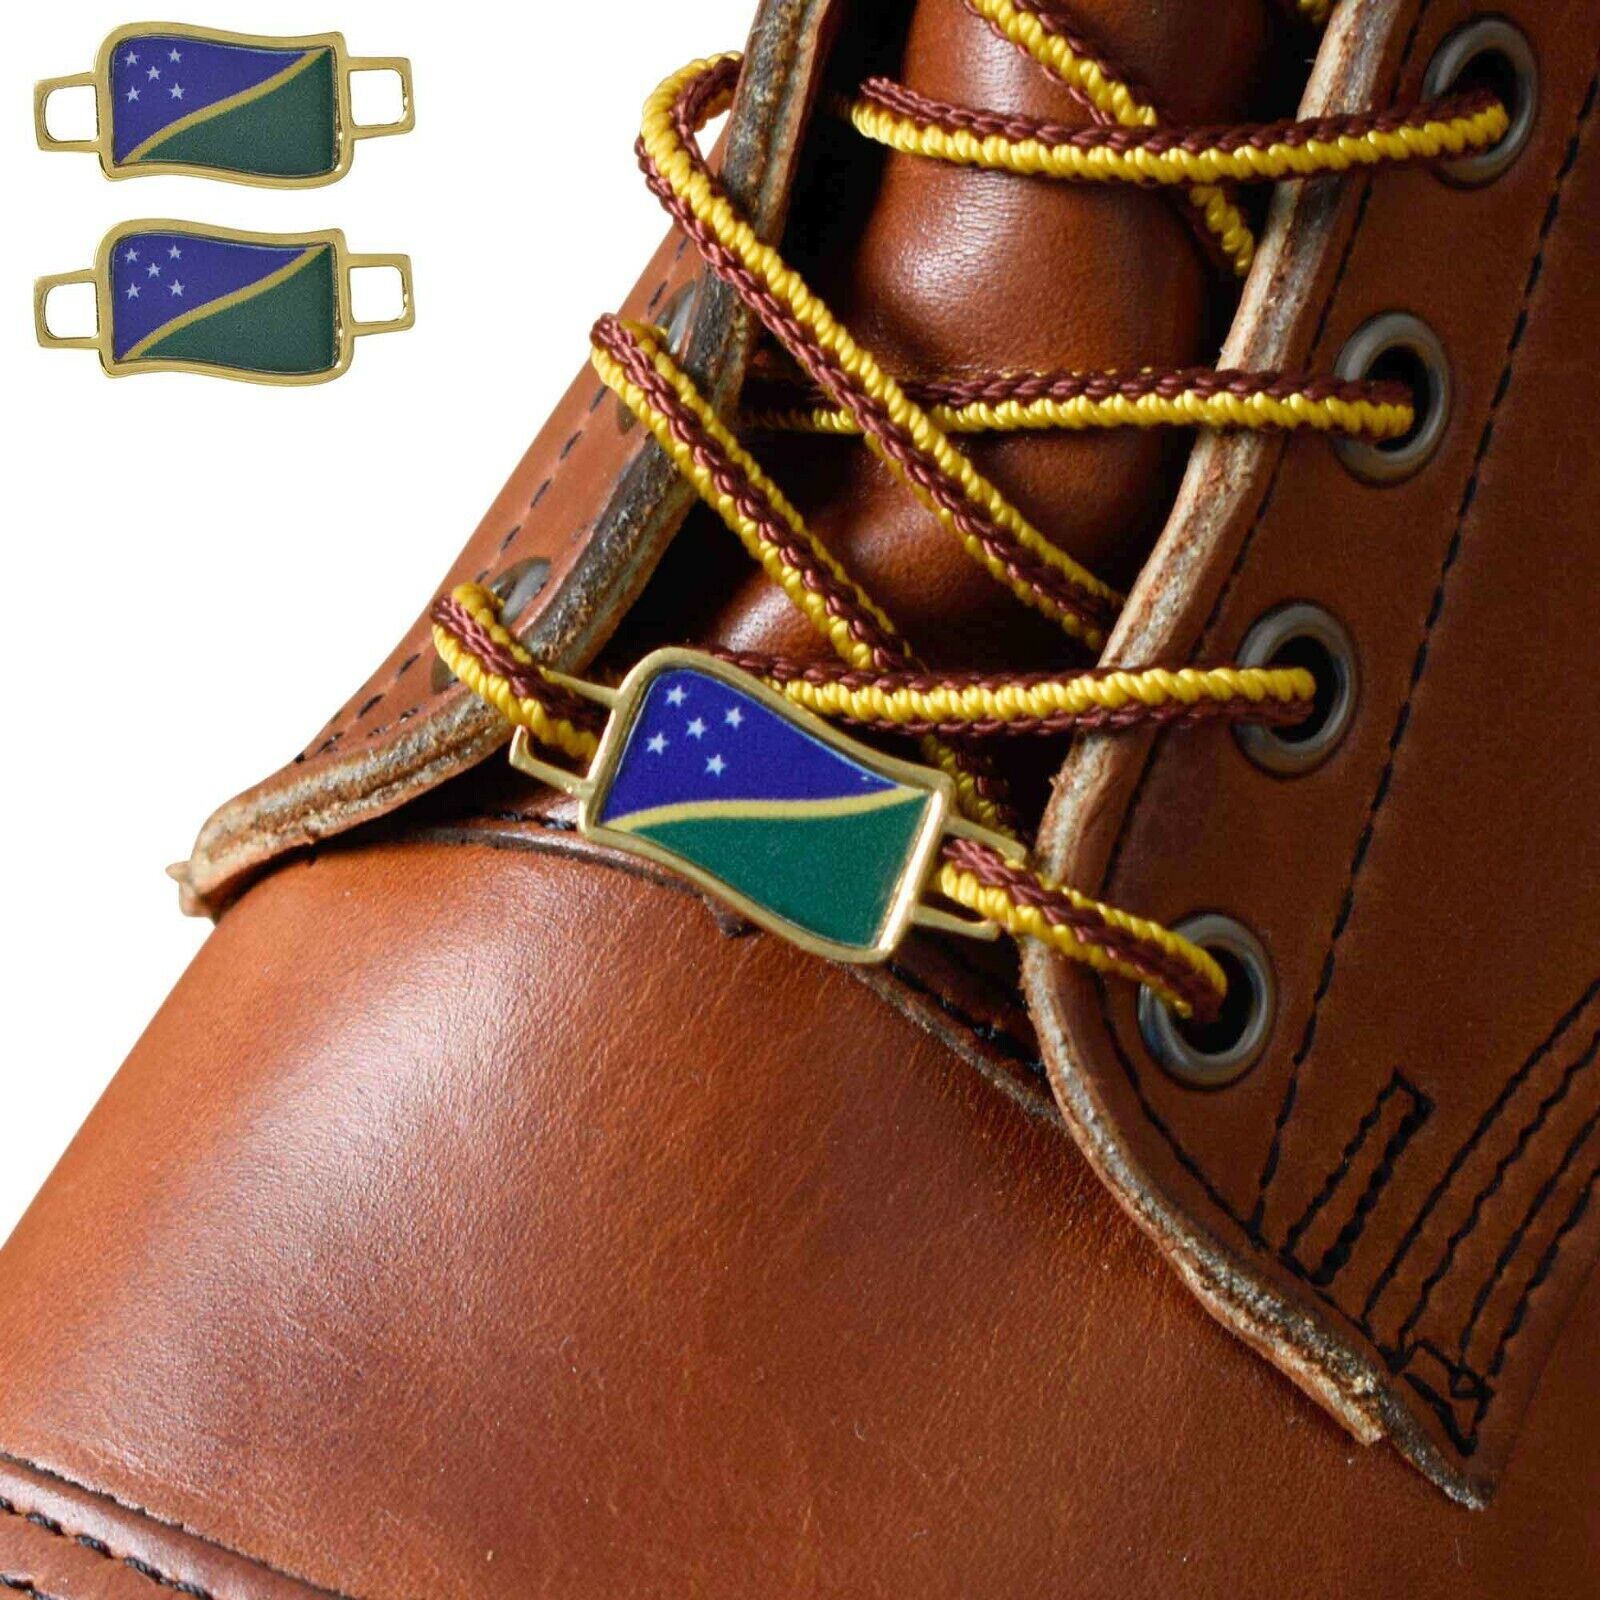 Solomon Islands Flags Shoes Boot Shoelace Keeper Holder Charm BrooklynMaker